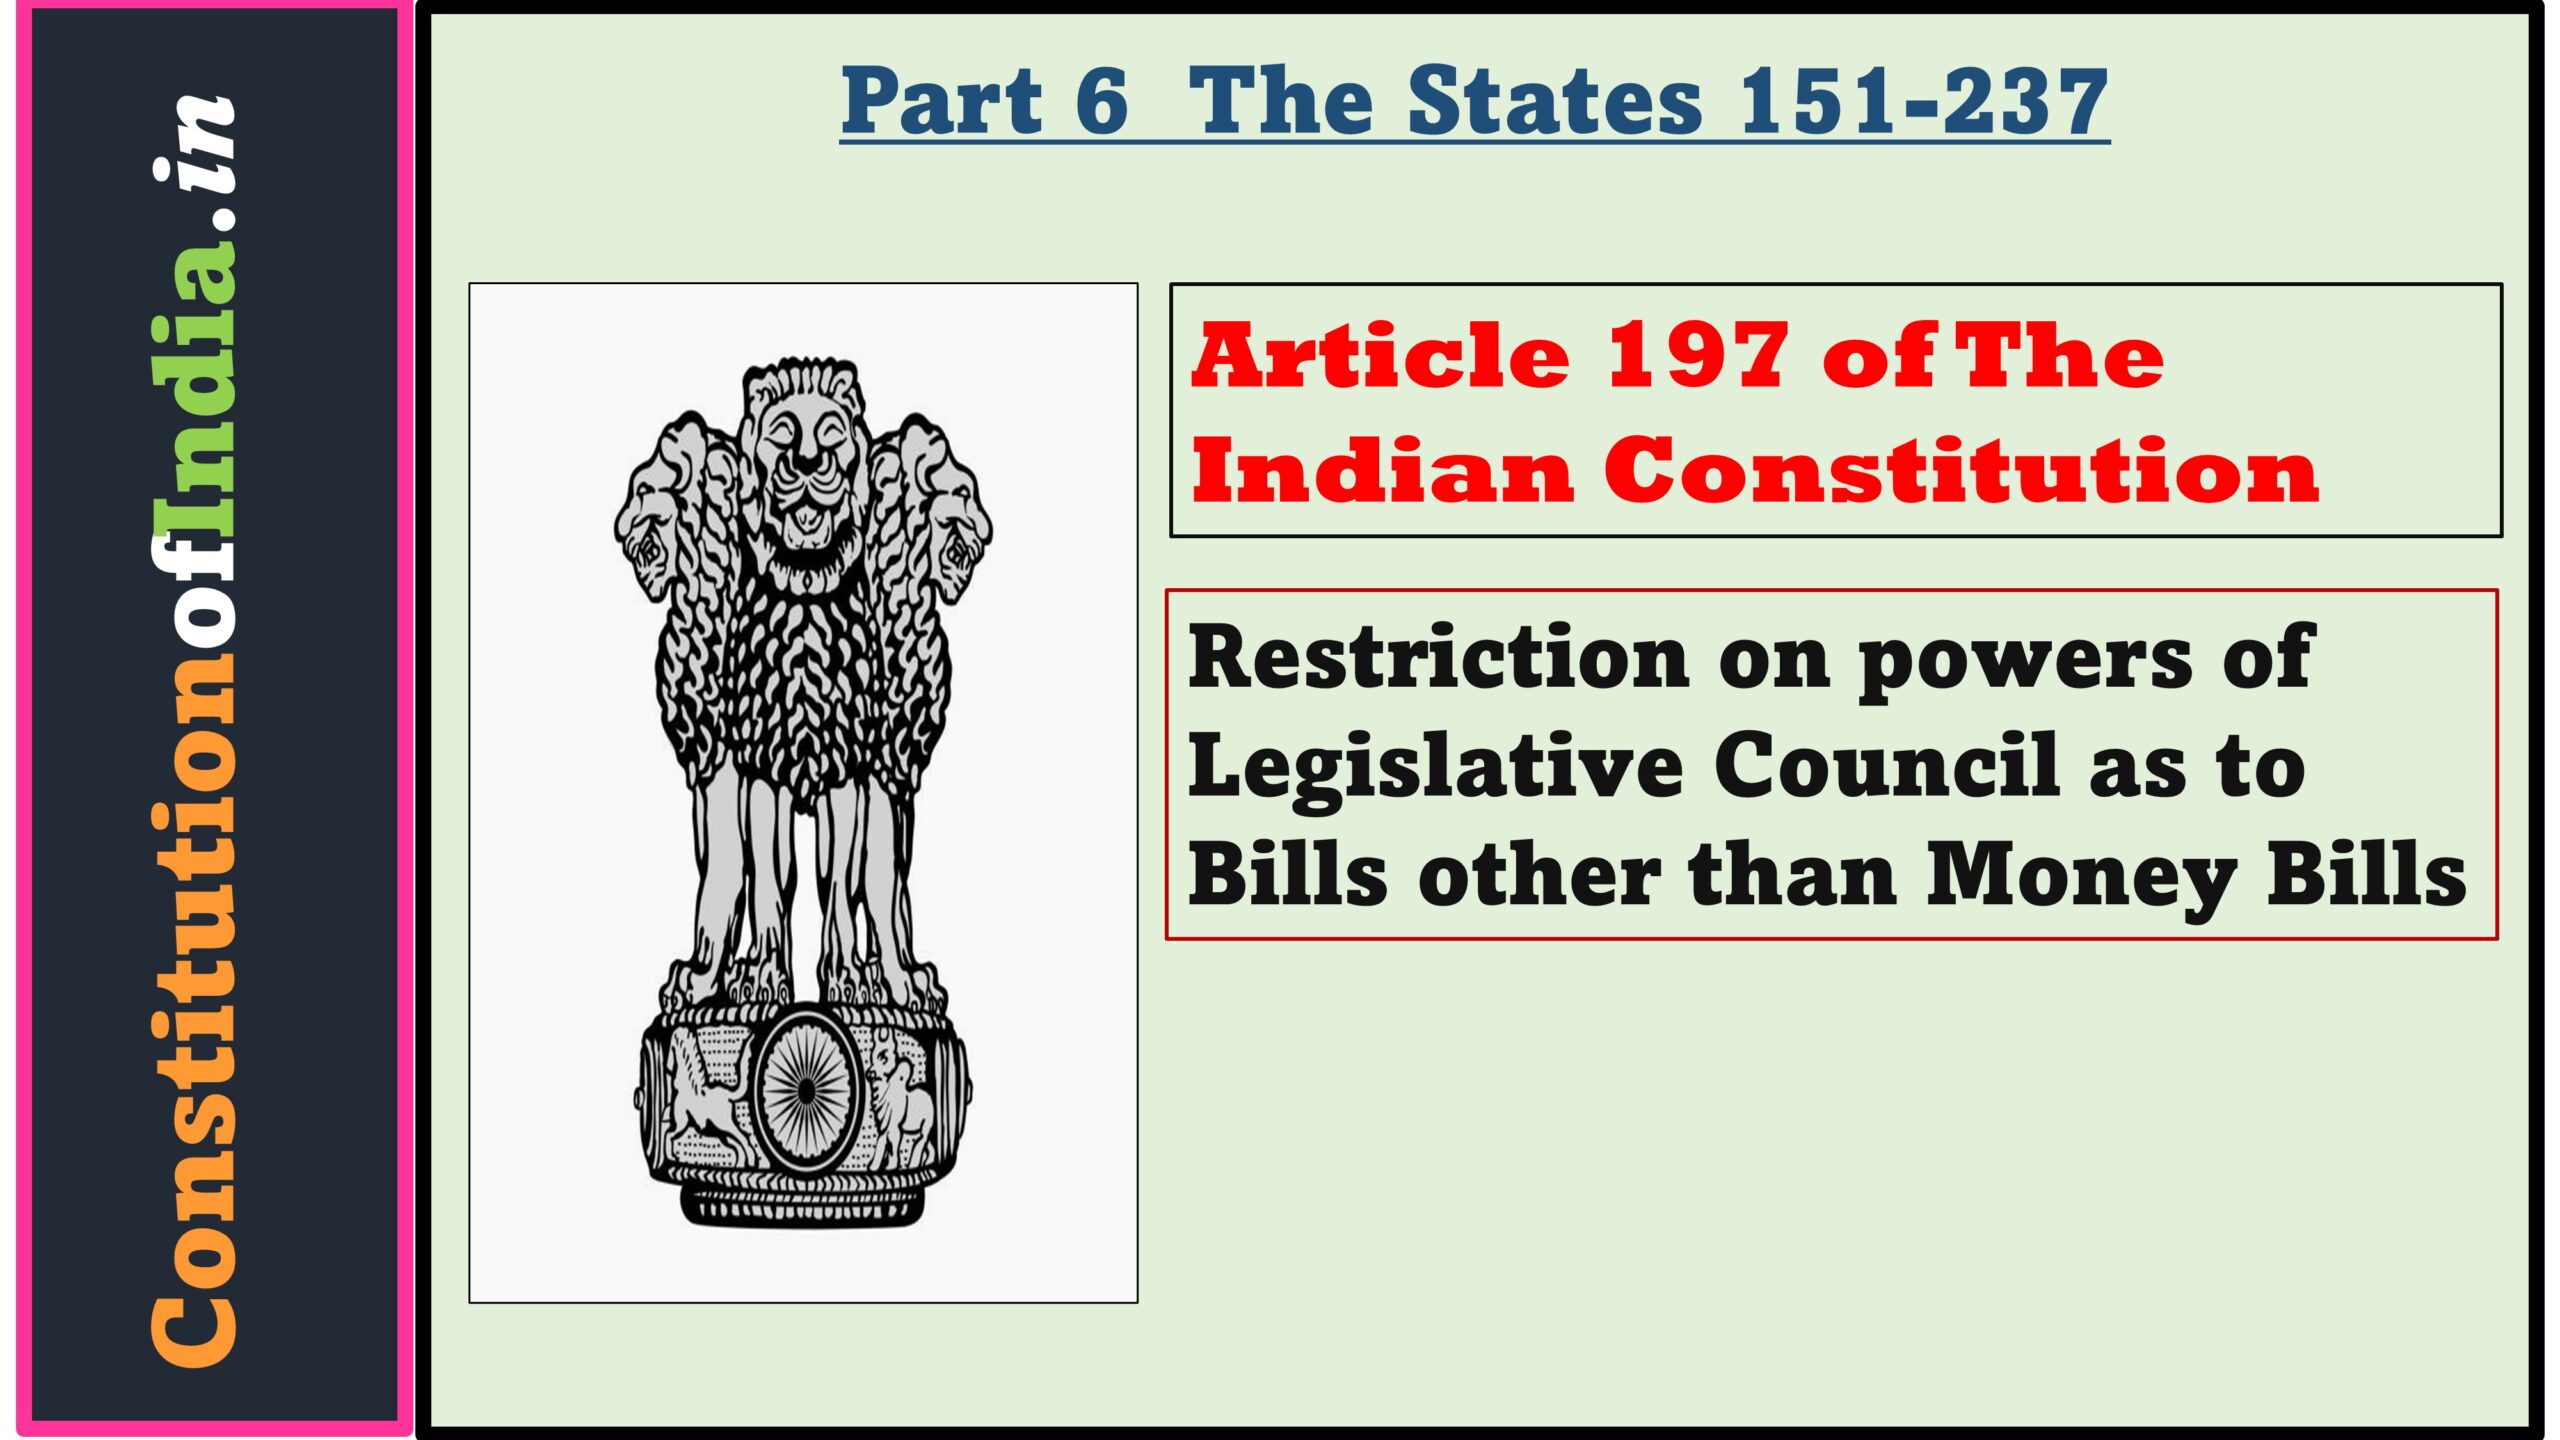 Article 197 of The Indian Constitution